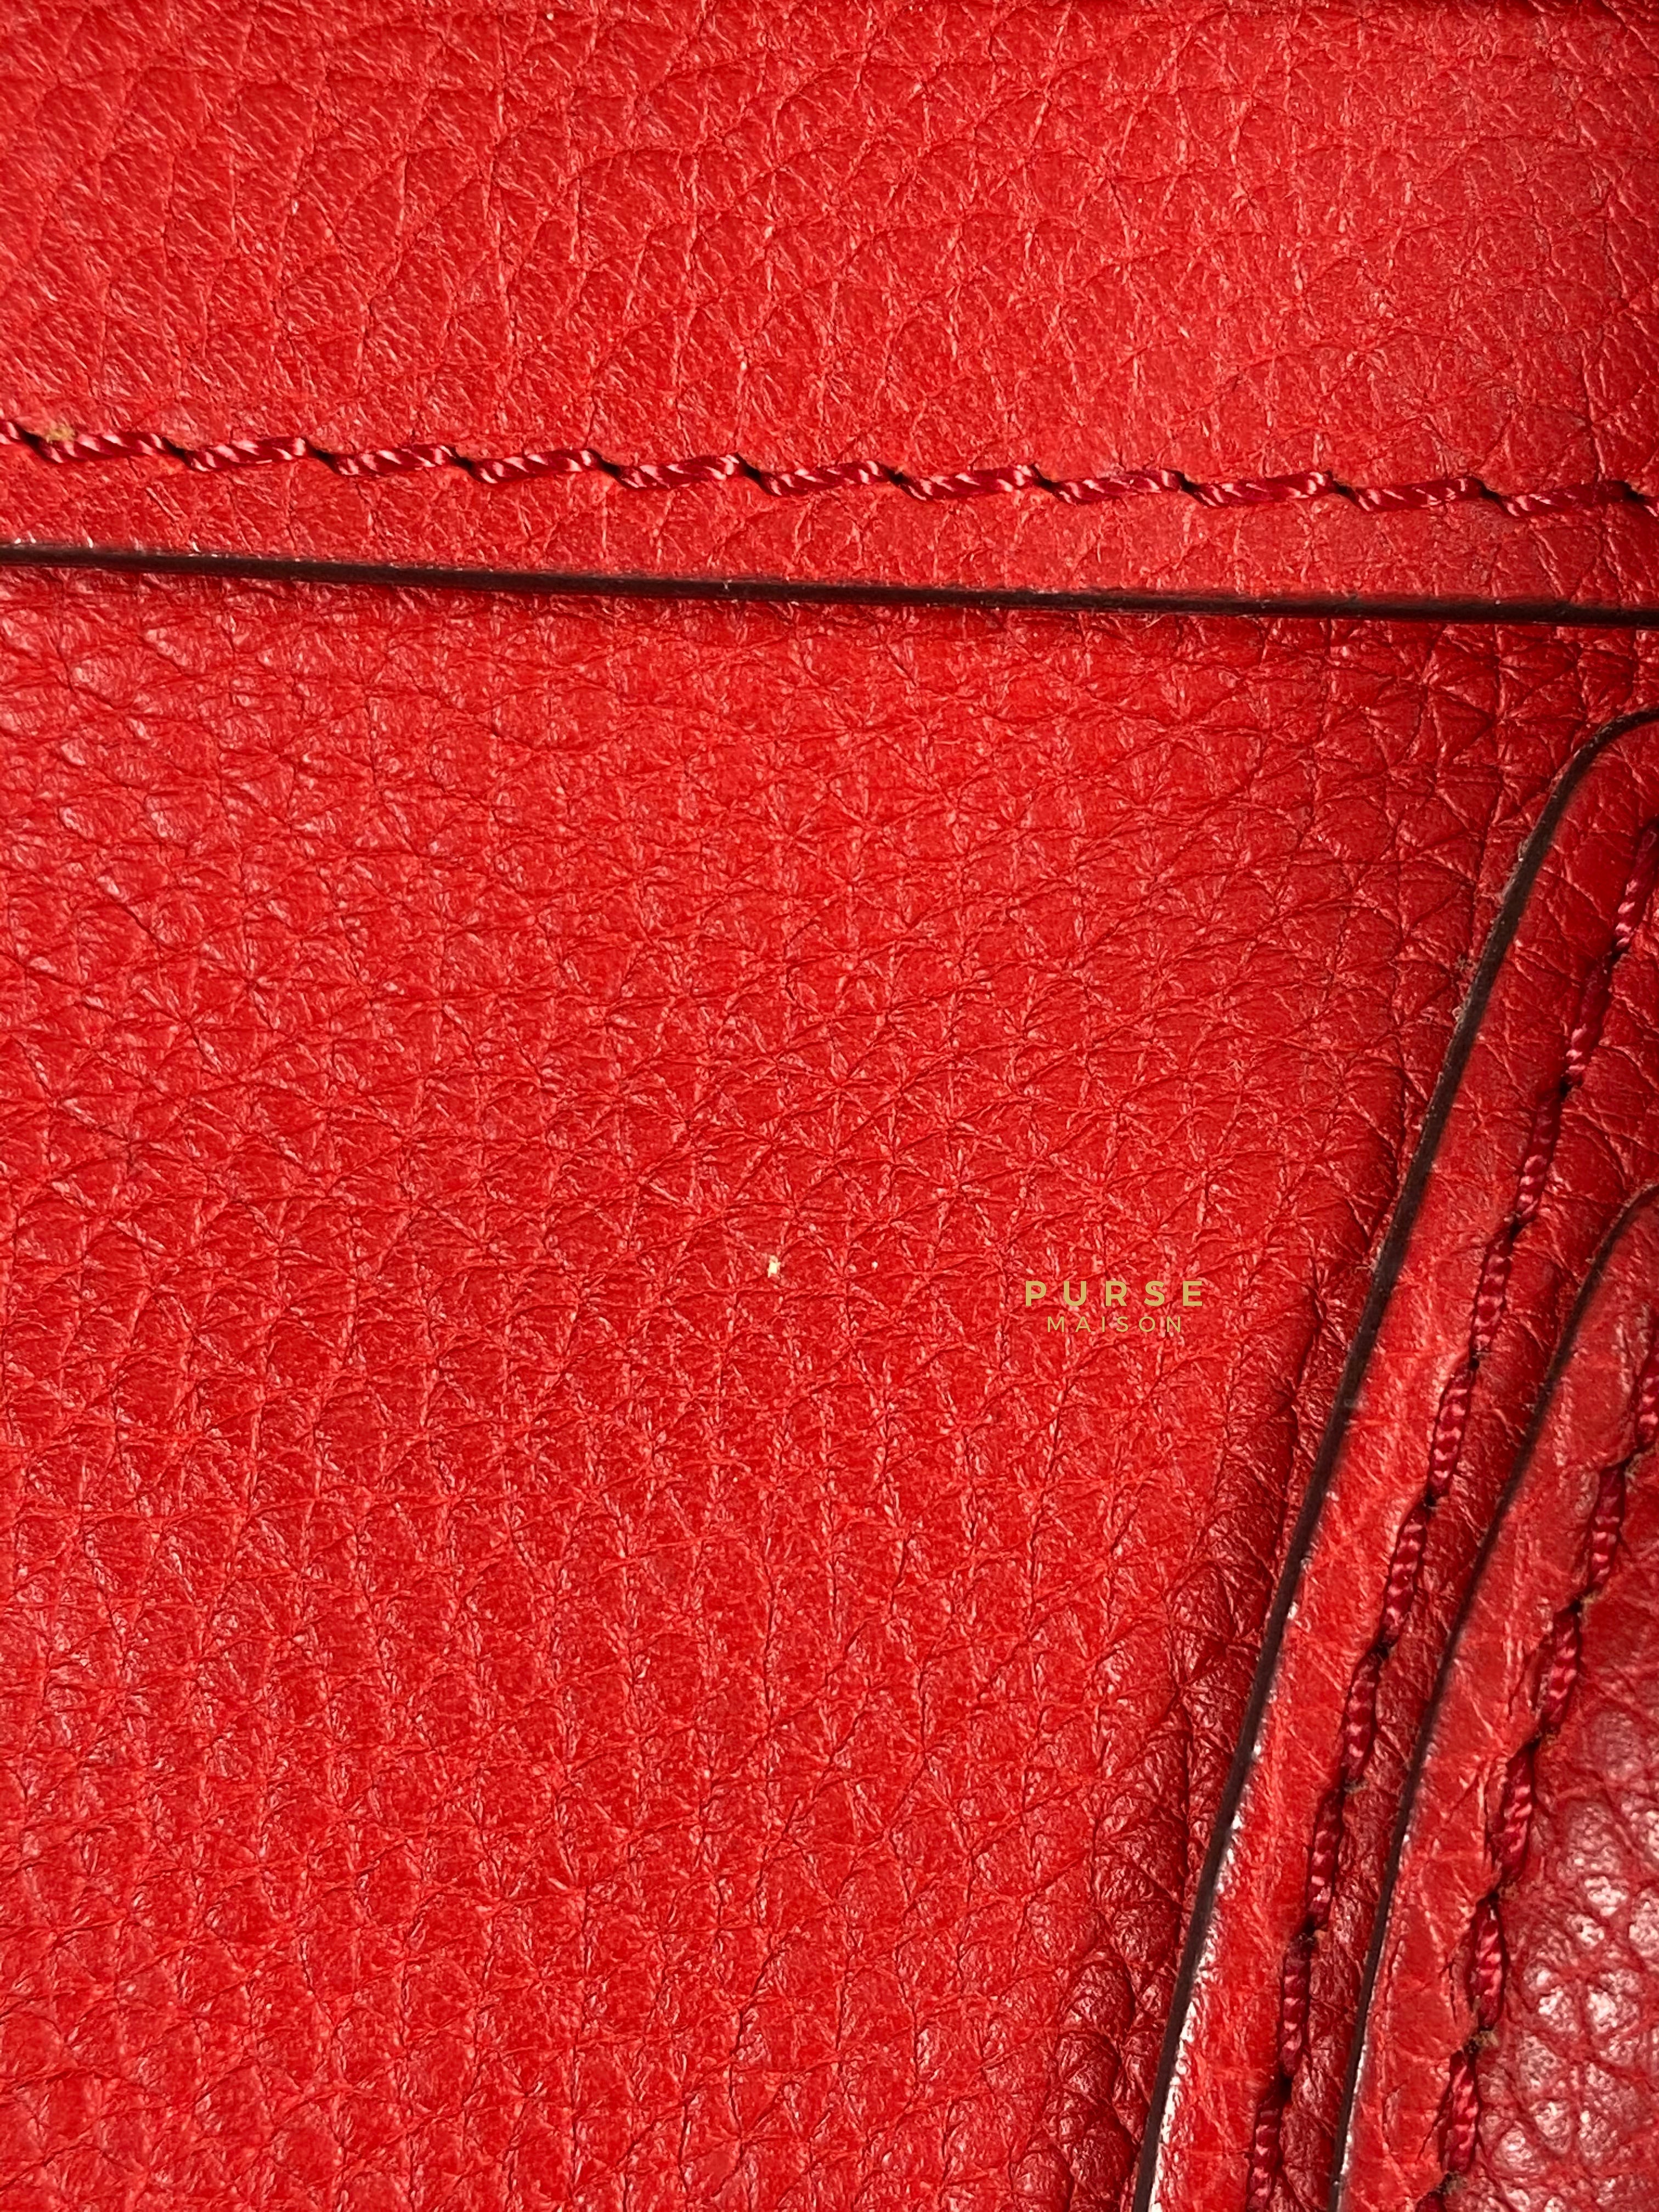 Celine Red Calfskin Leather Micro Luggage Tote Bag | Purse Maison Luxury Bags Shop